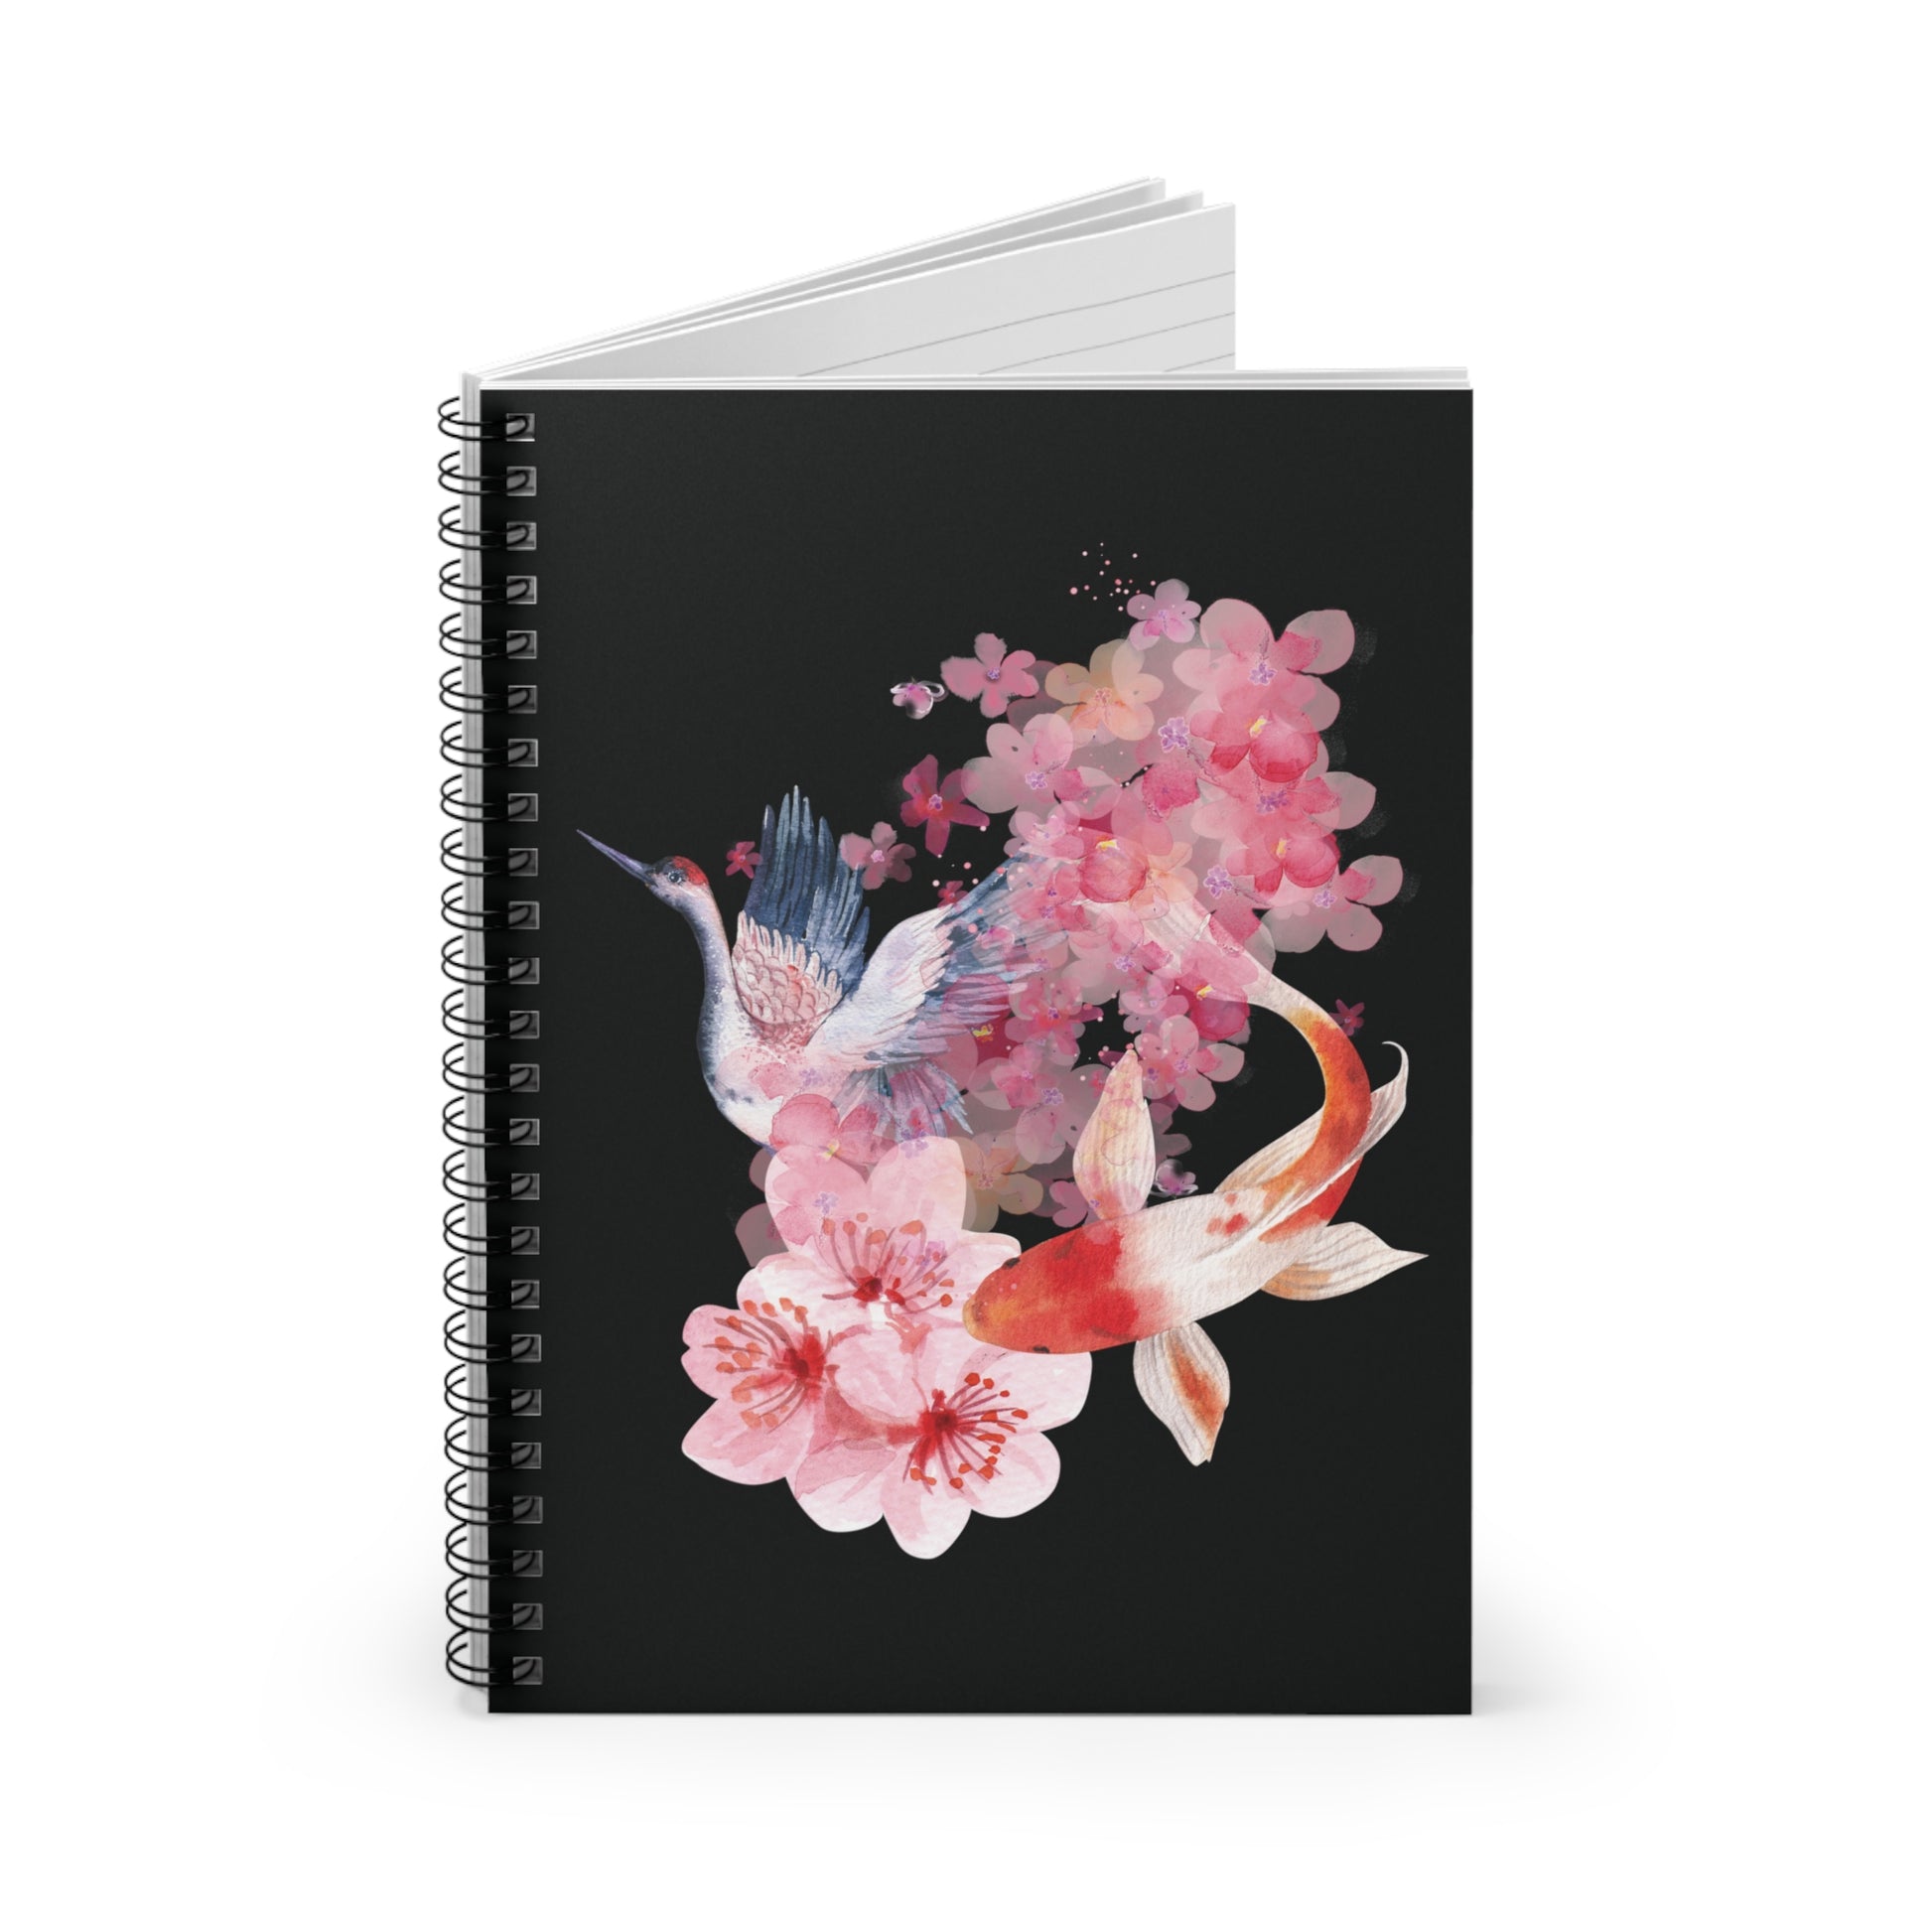 Don't Be Koi: Black Spiral Notebook - Log Books - Journals - Diaries - and More Custom Printed by TheGlassyLass